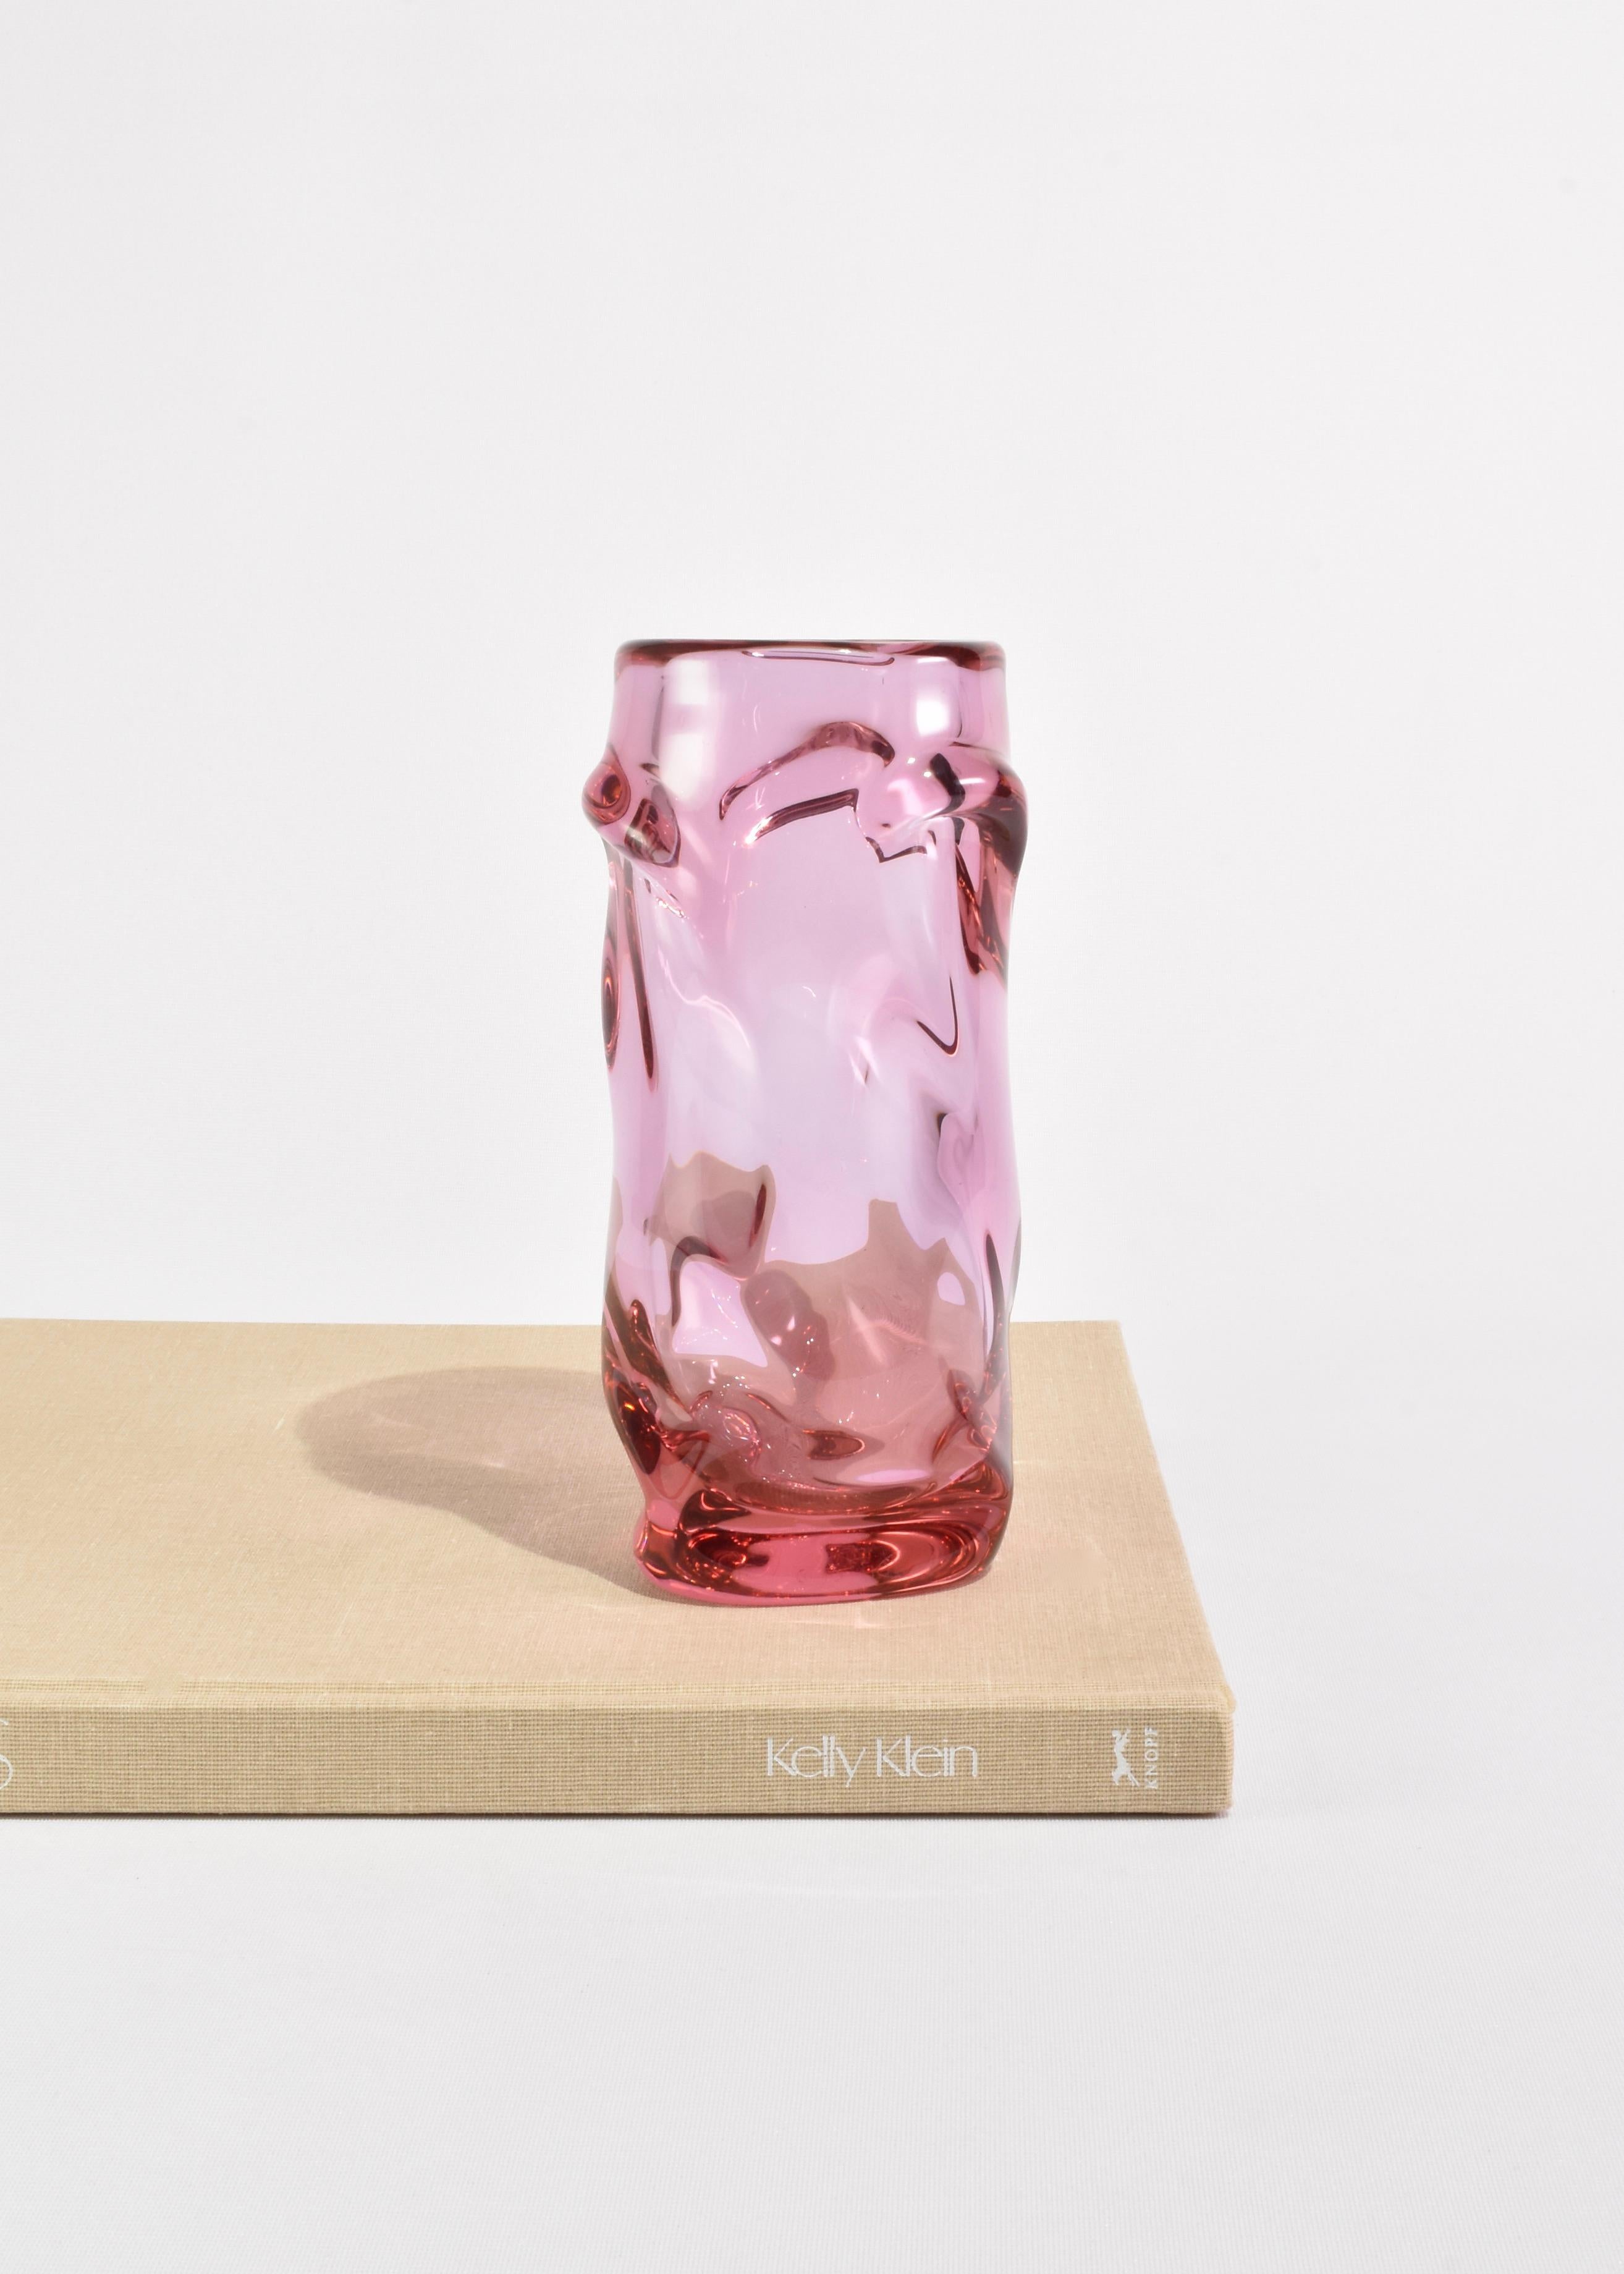 Hand-Crafted Pink Glass Vase